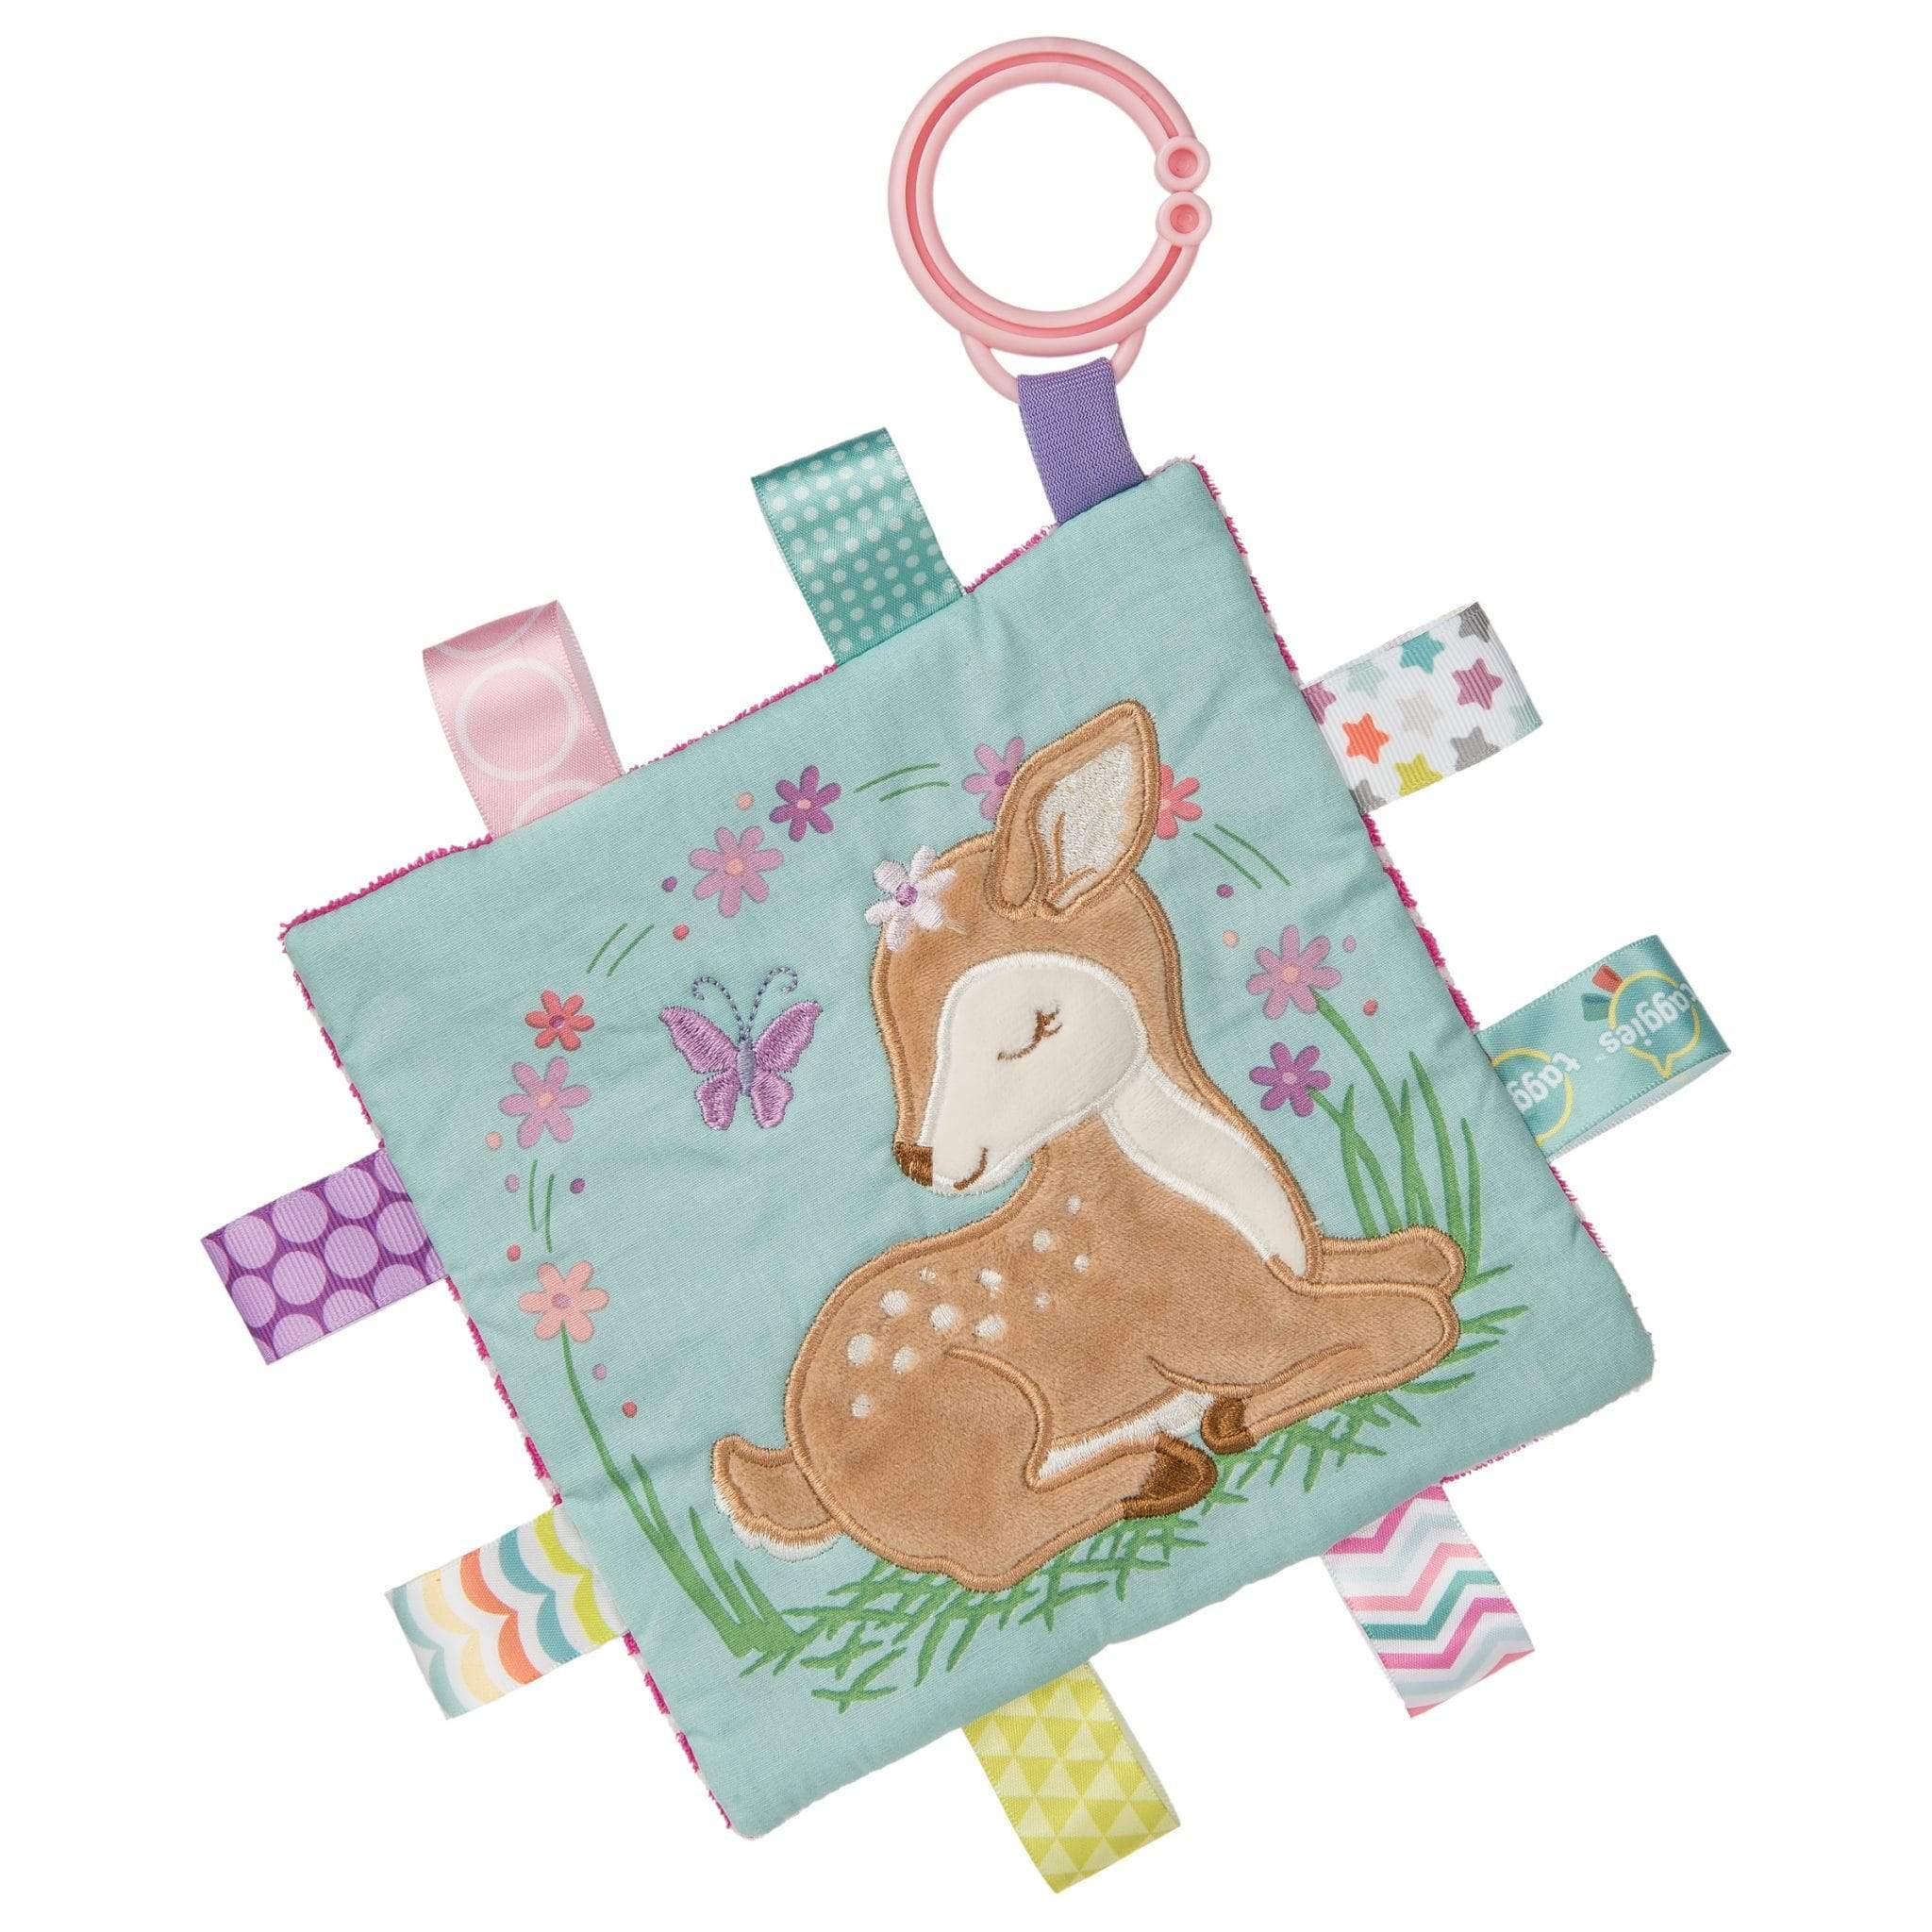 Taggies Crinkle Me Flora Fawn by Mary Meyer - Bumbles & Boo